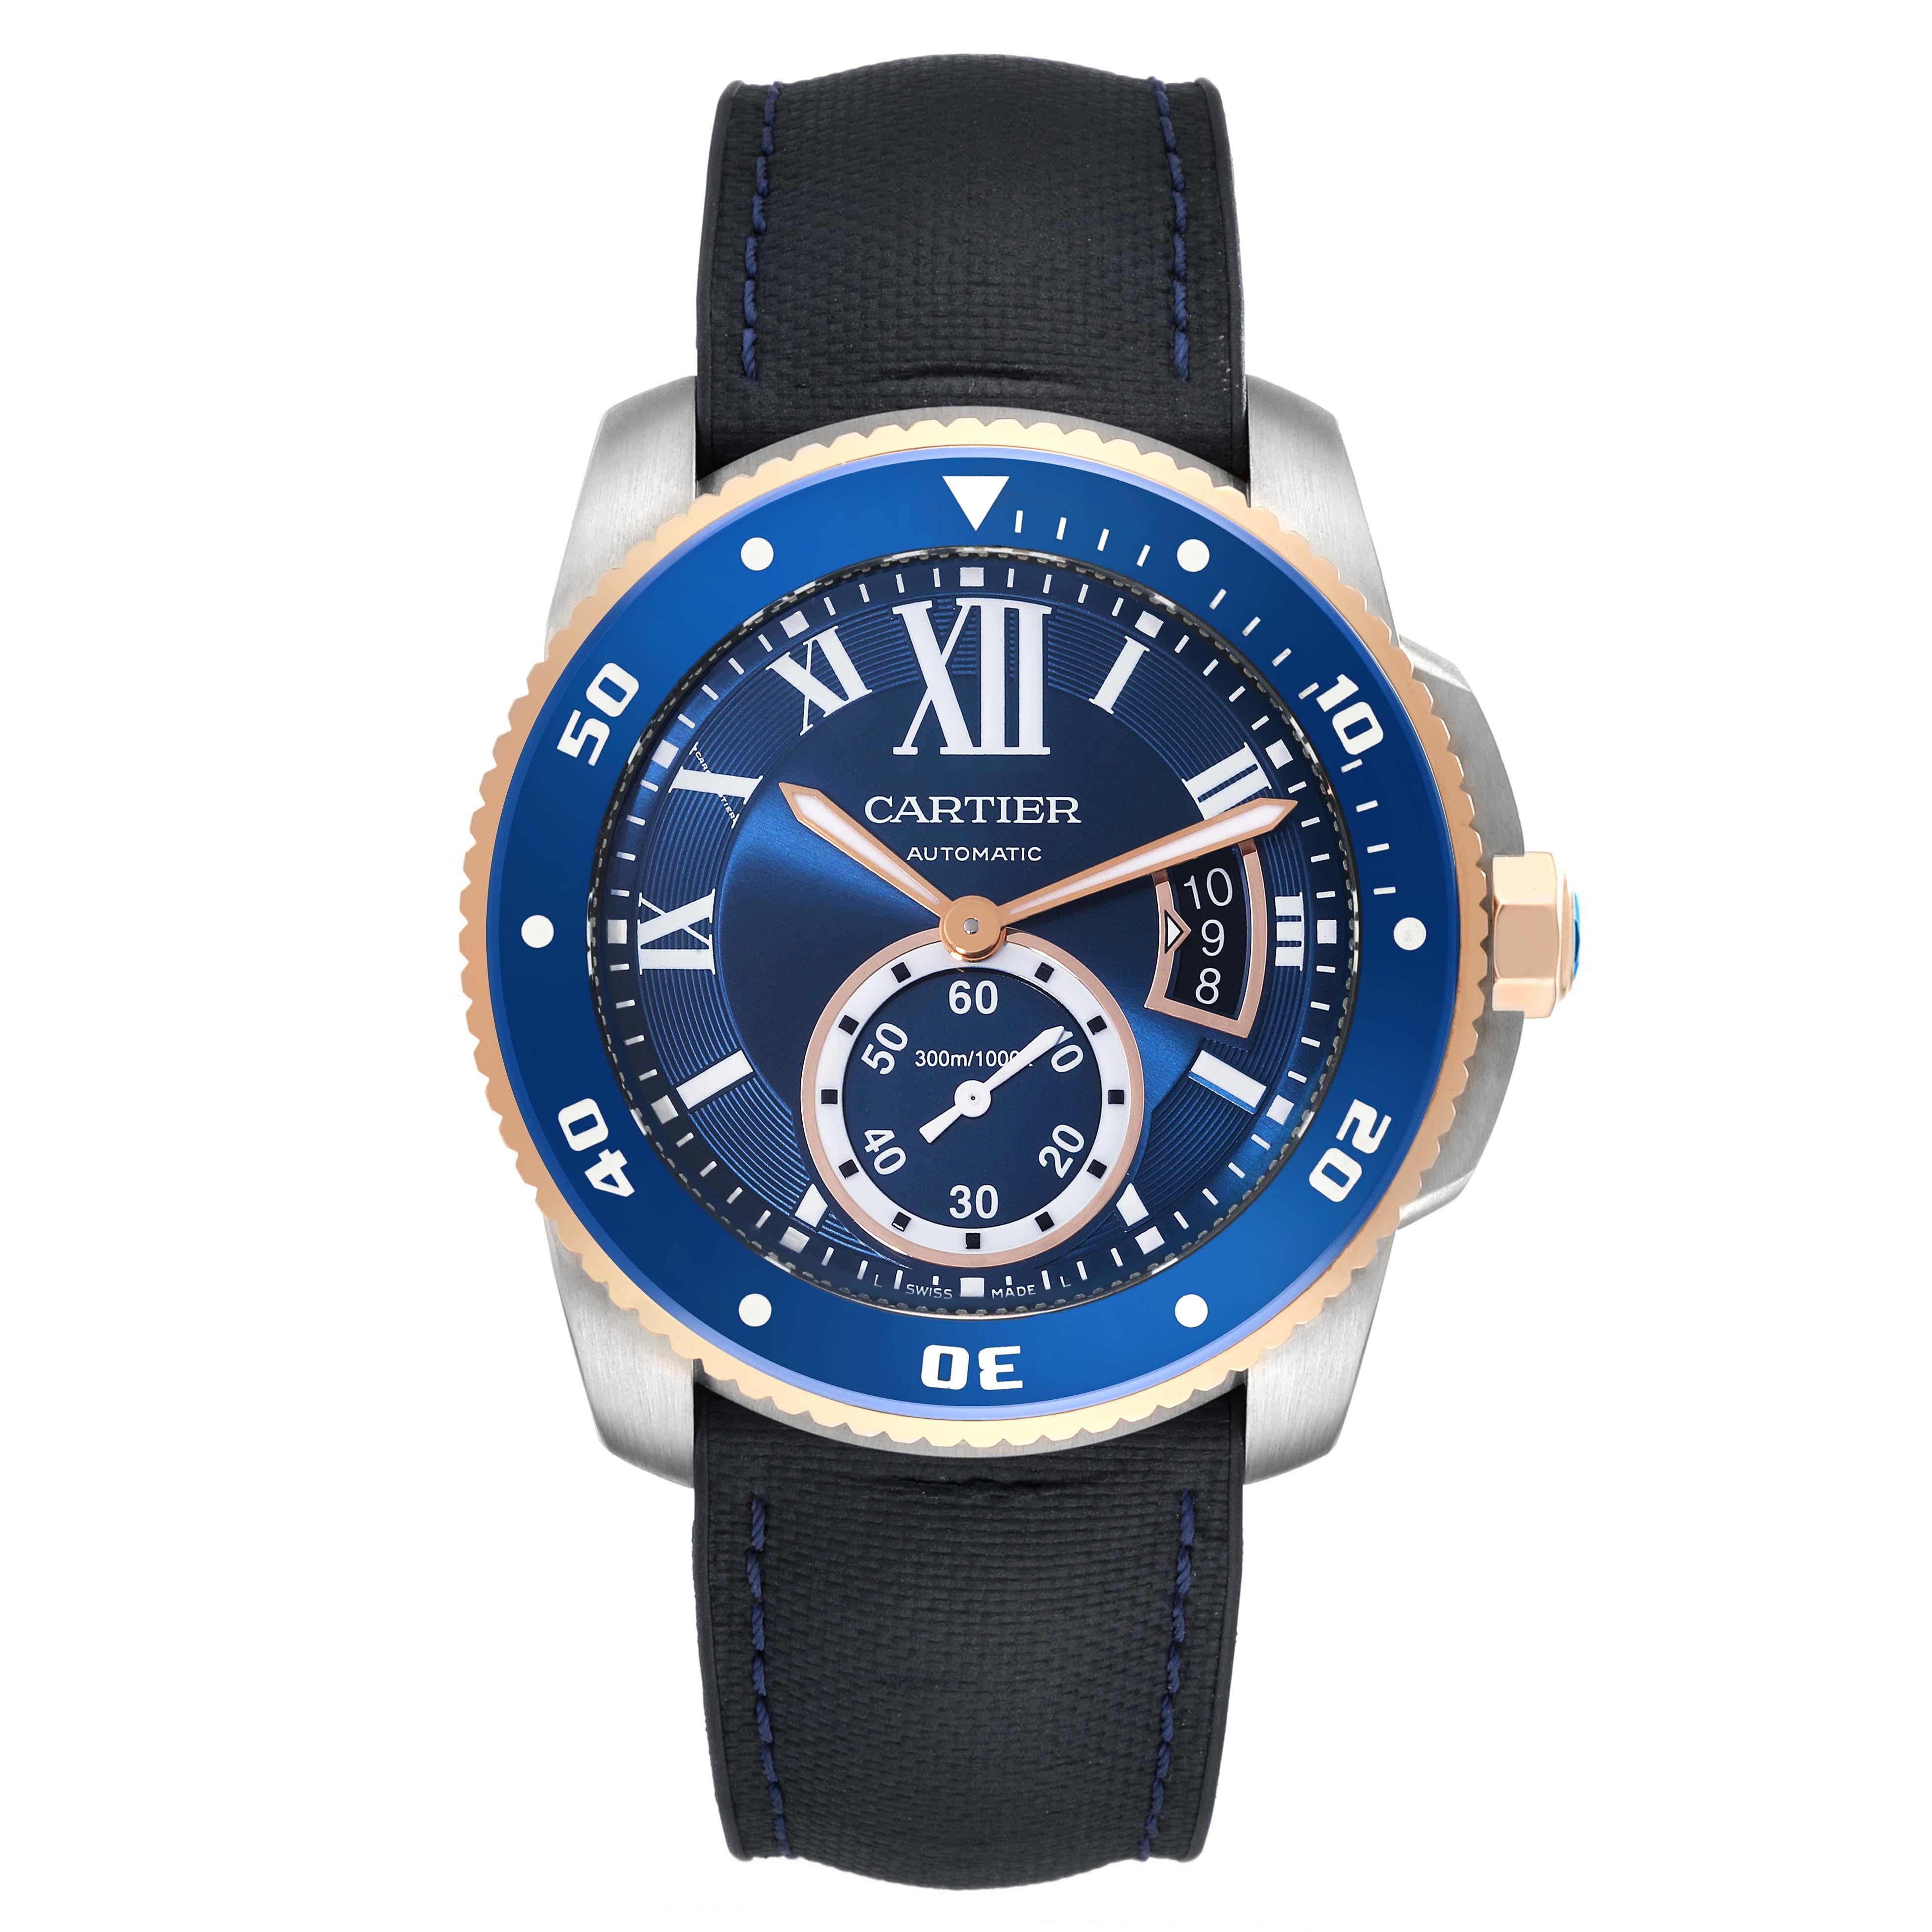 Cartier Calibre Diver Steel Rose Gold Blue Dial Mens Watch W2CA0008 Box Card. Automatic self-winding movement. Stainless steel round case 42.0 mm in diameter. Octagonal 18k rose gold crown set with faceted blue spinel. Case thickness: 11 mm. Blue